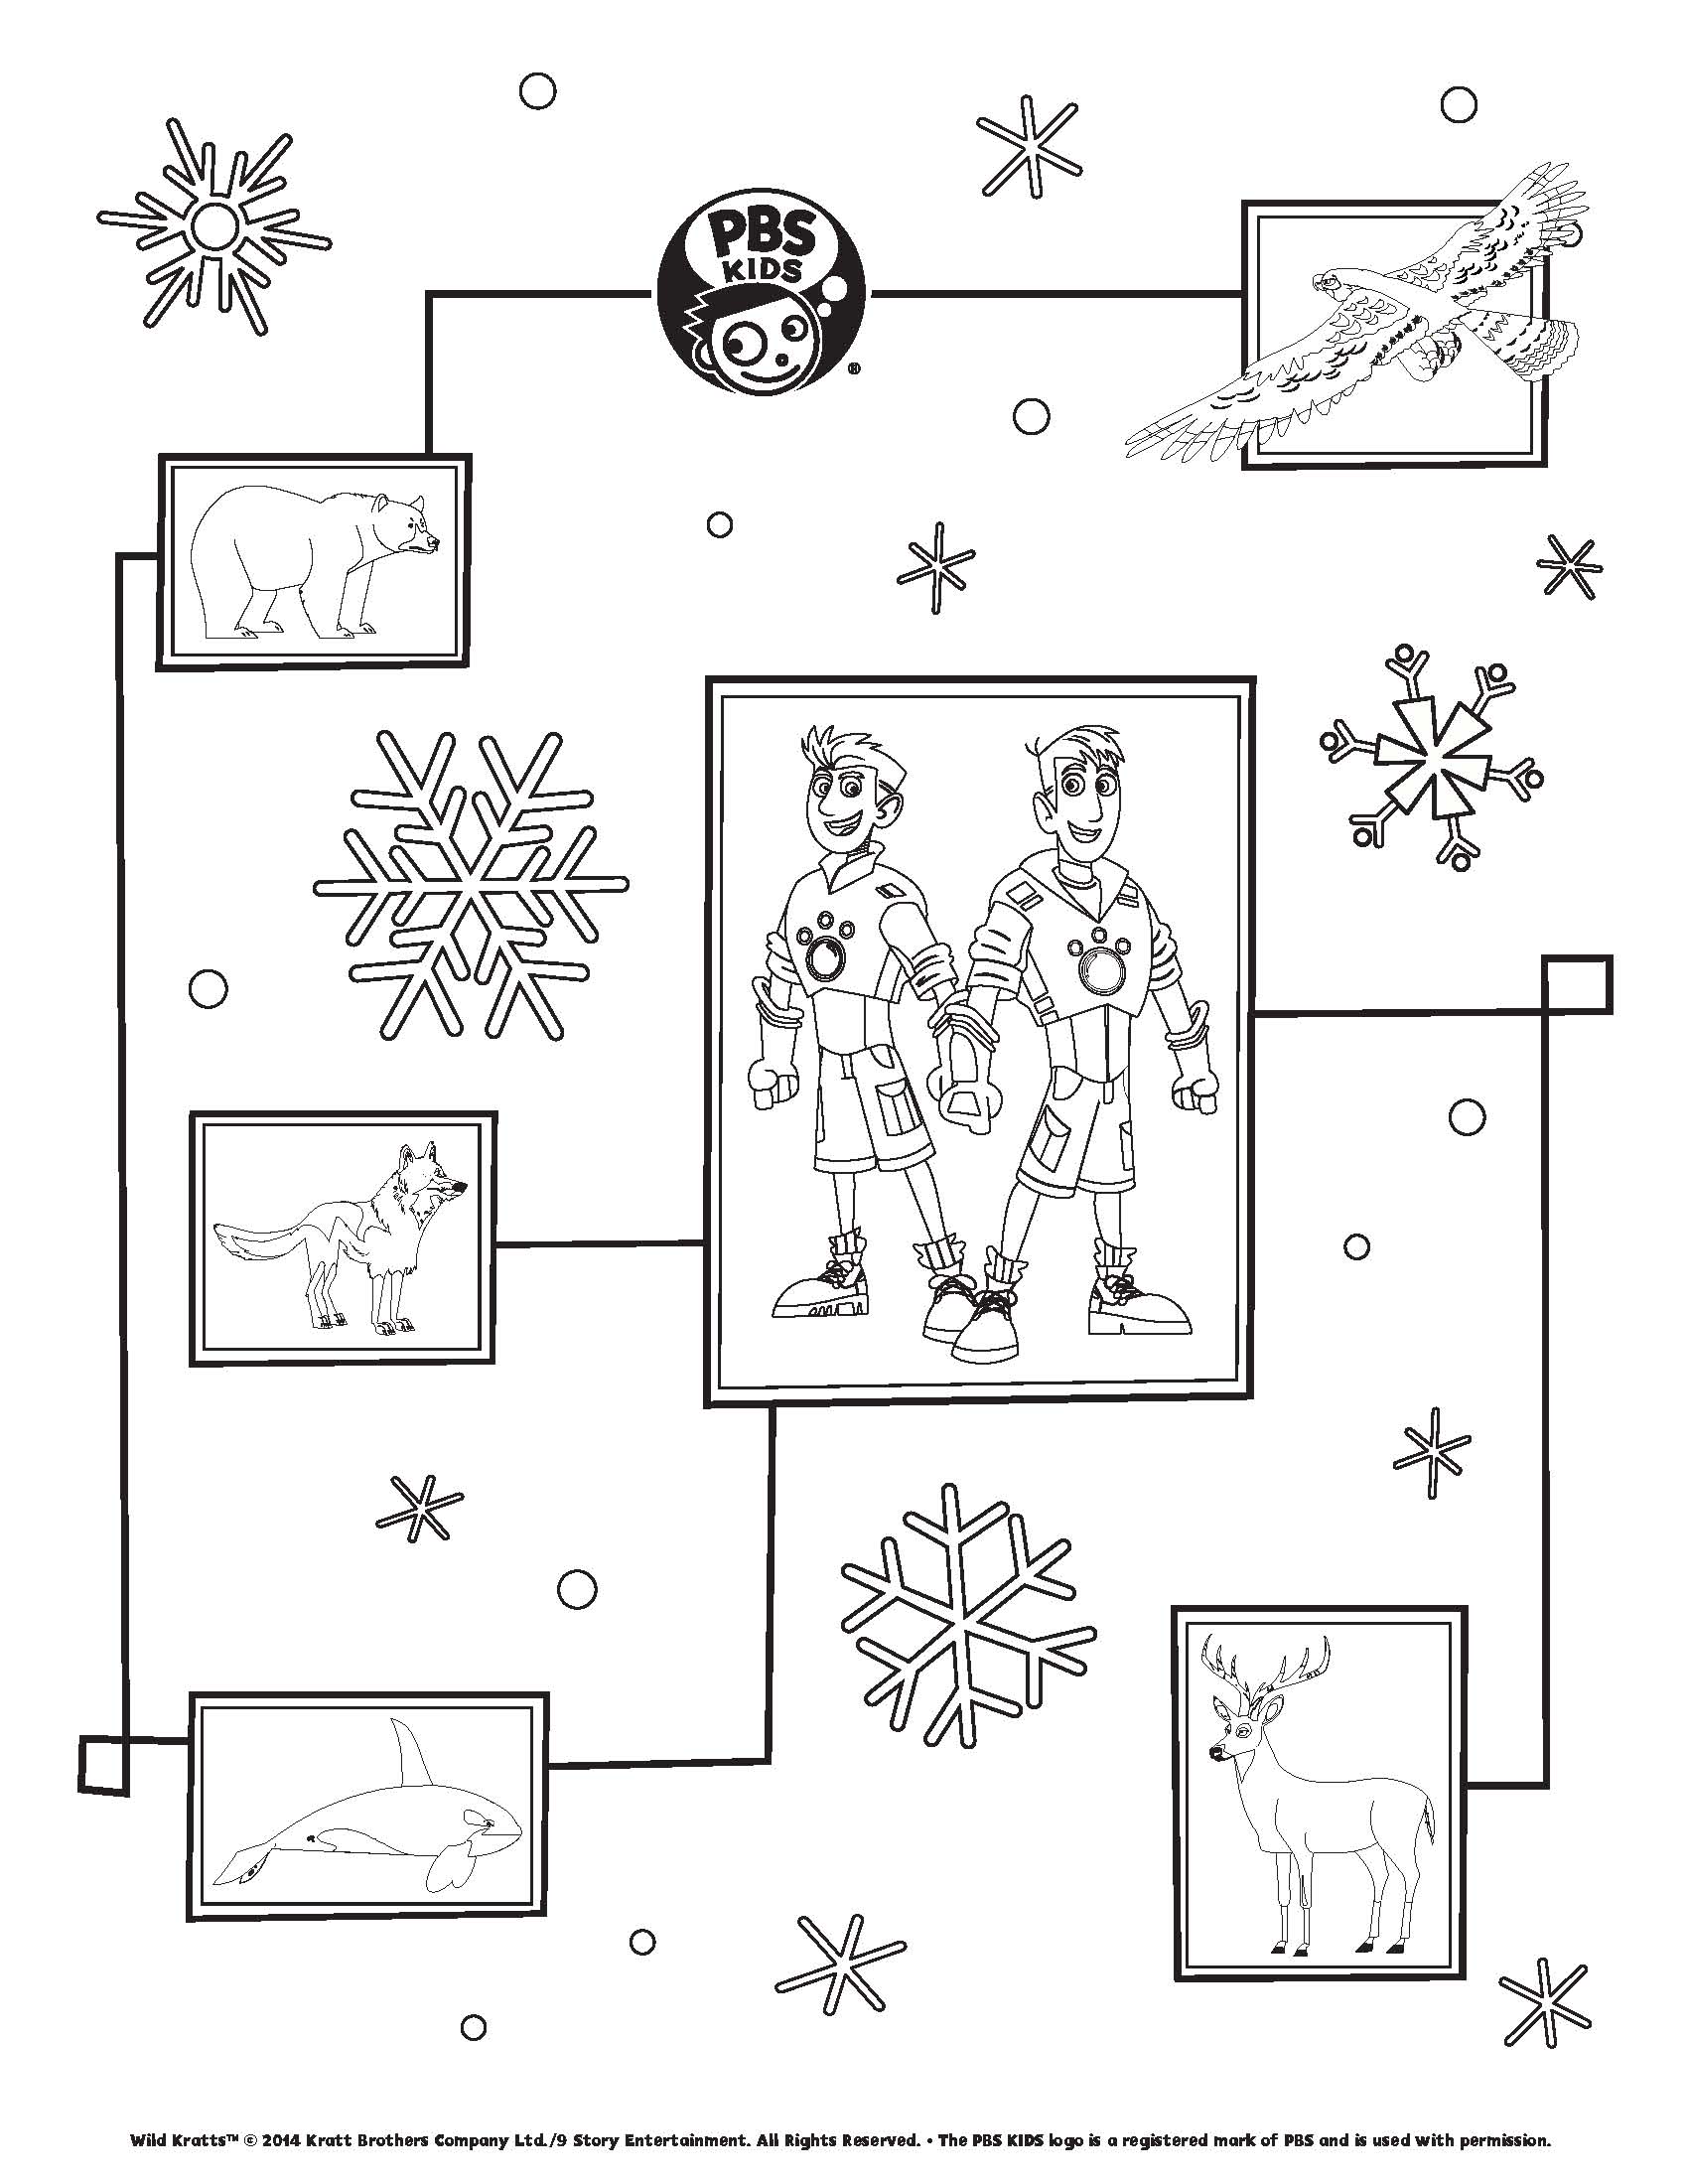 Wild kratts_wrapping paper_Page_2